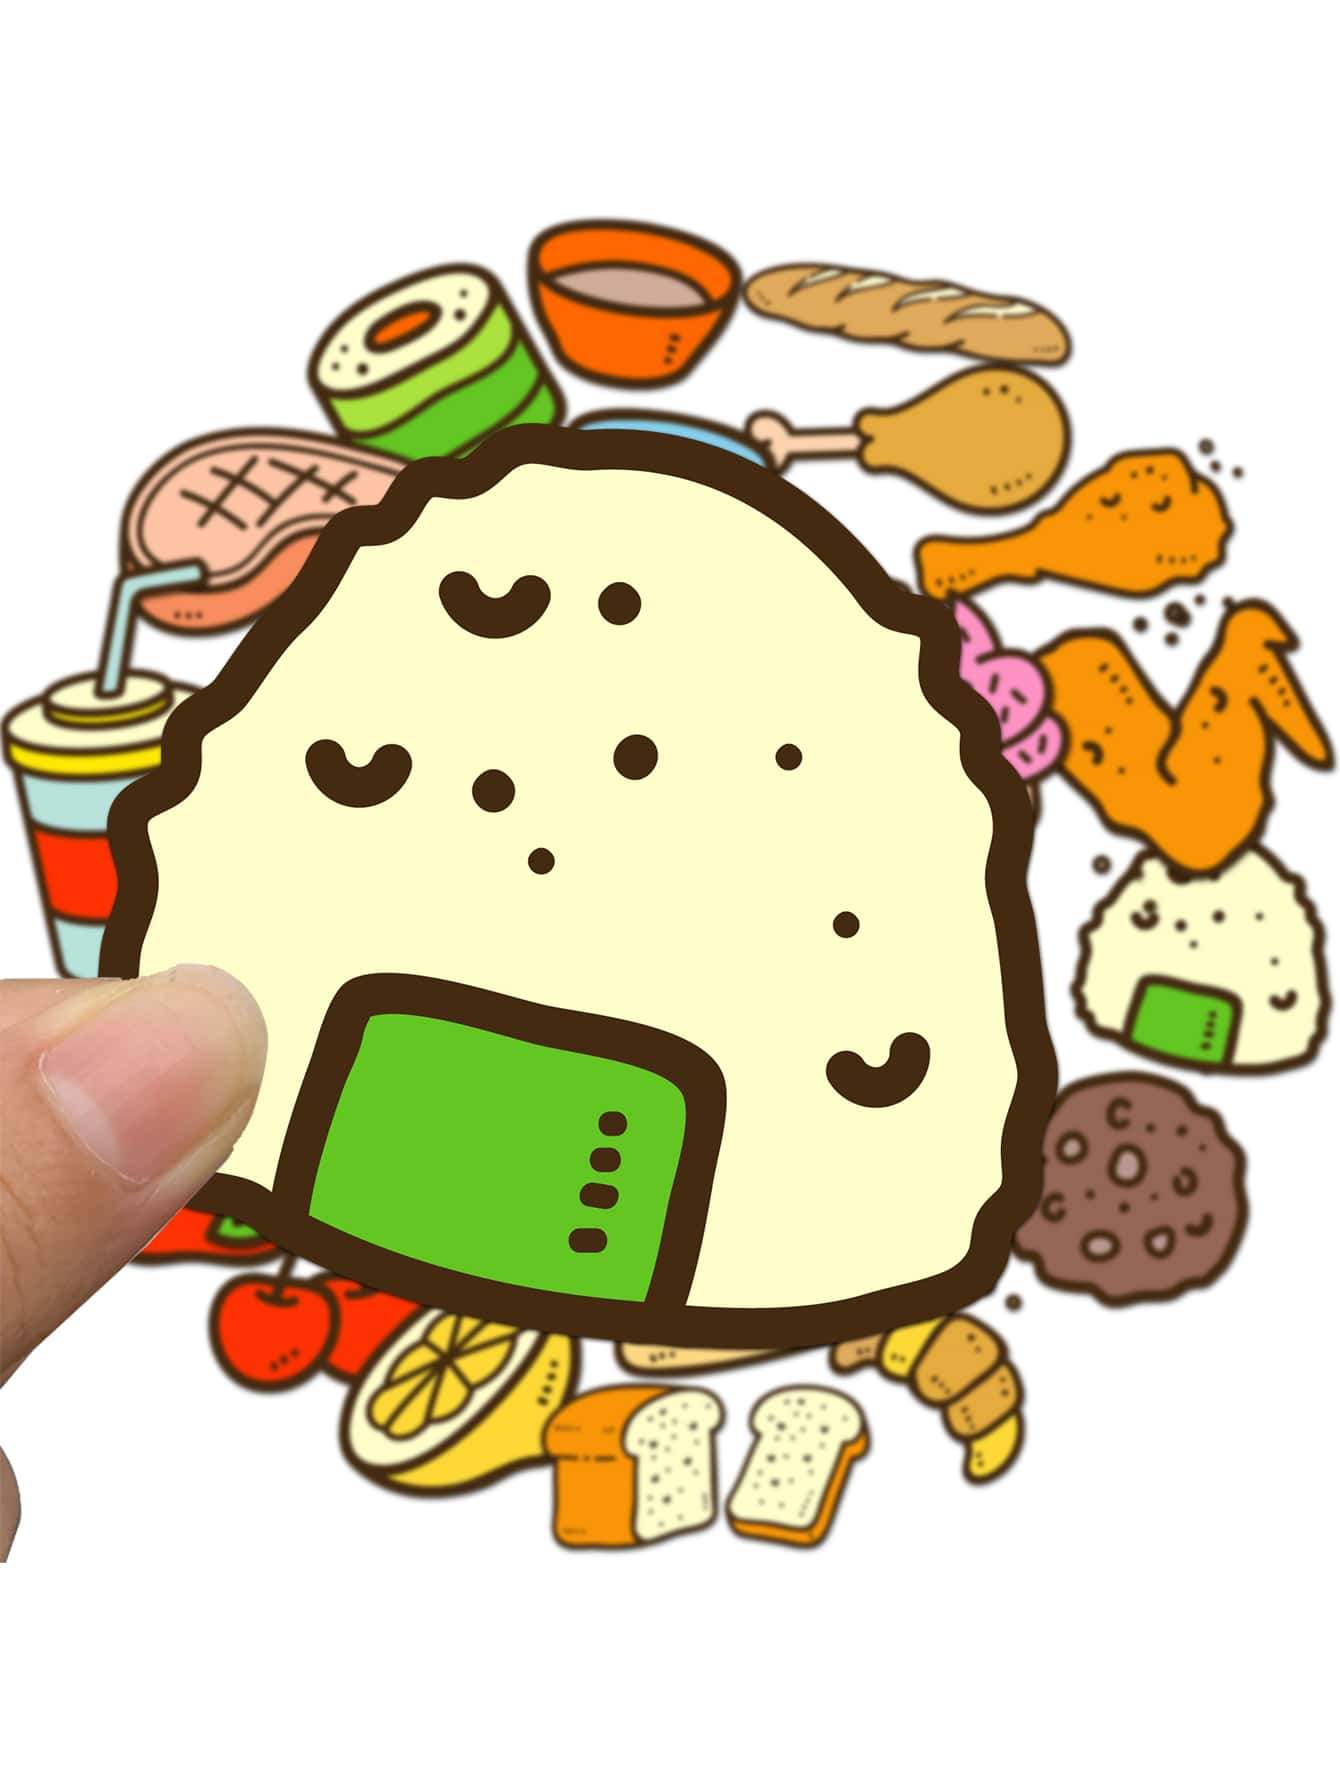 The Cute Food Stickers is a simple and interesting sticker